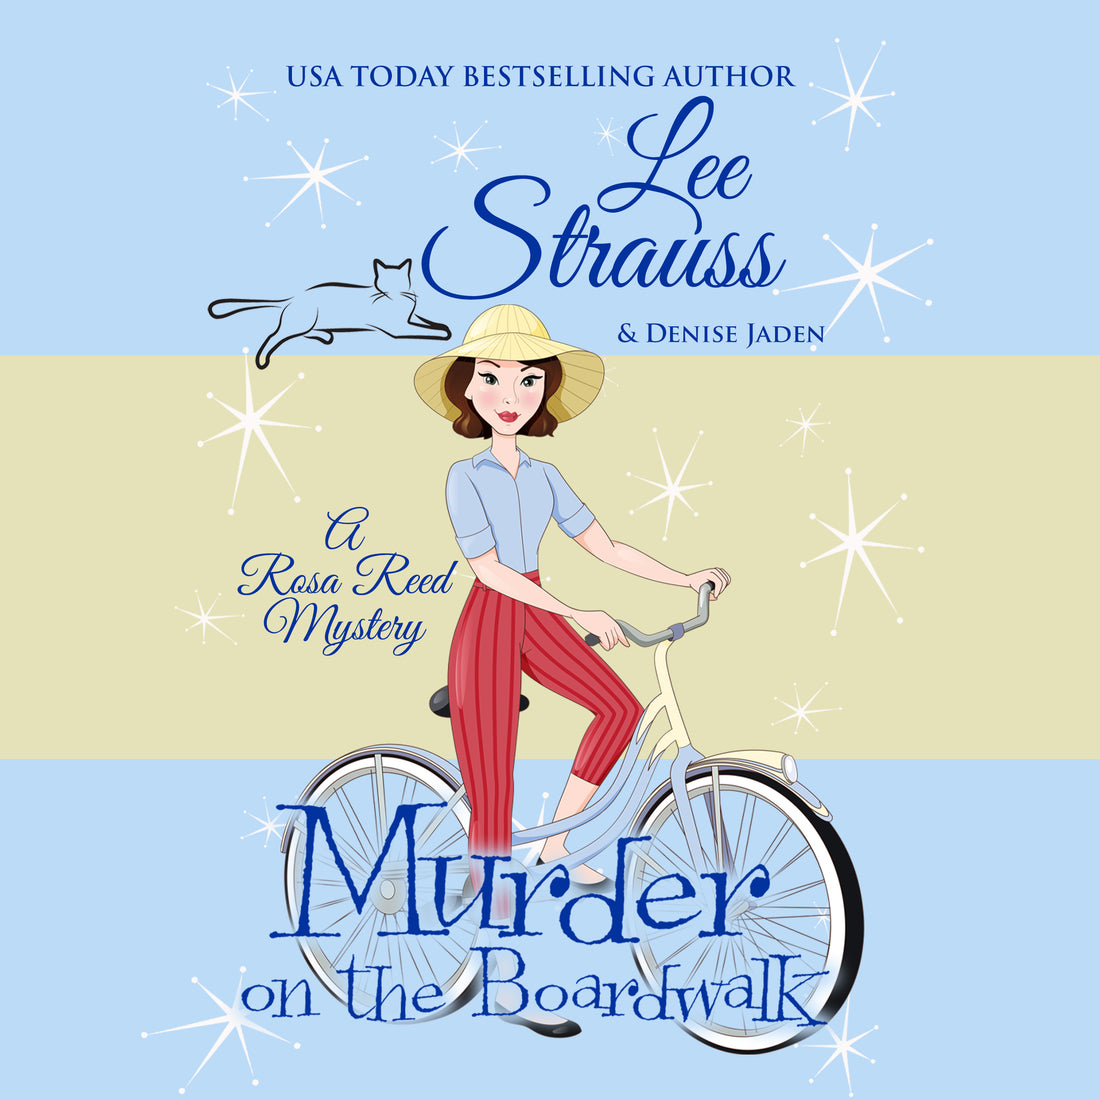 12 Days of Christmas Audio Book Giveaway - Day 2- Murder on the Boardwalk